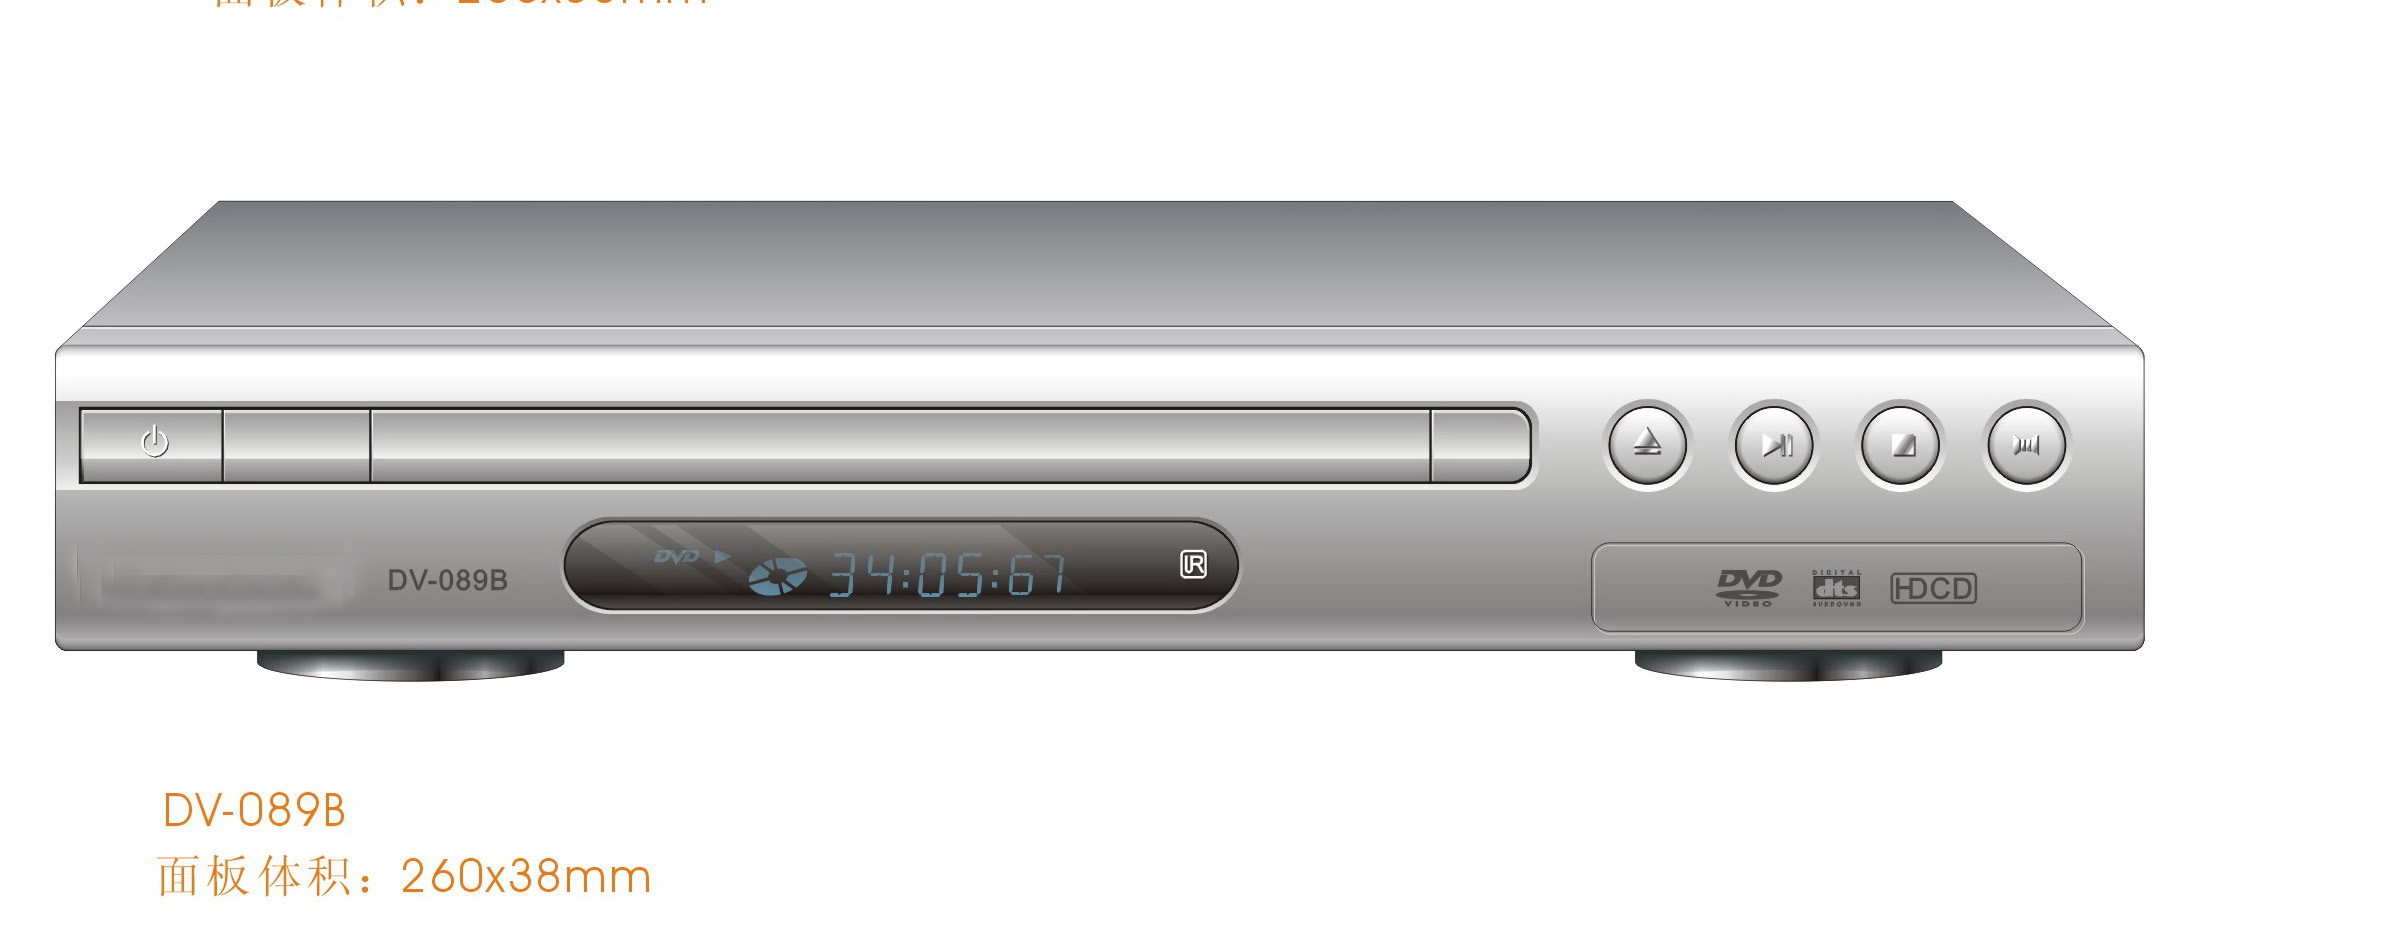 DVD player with small size